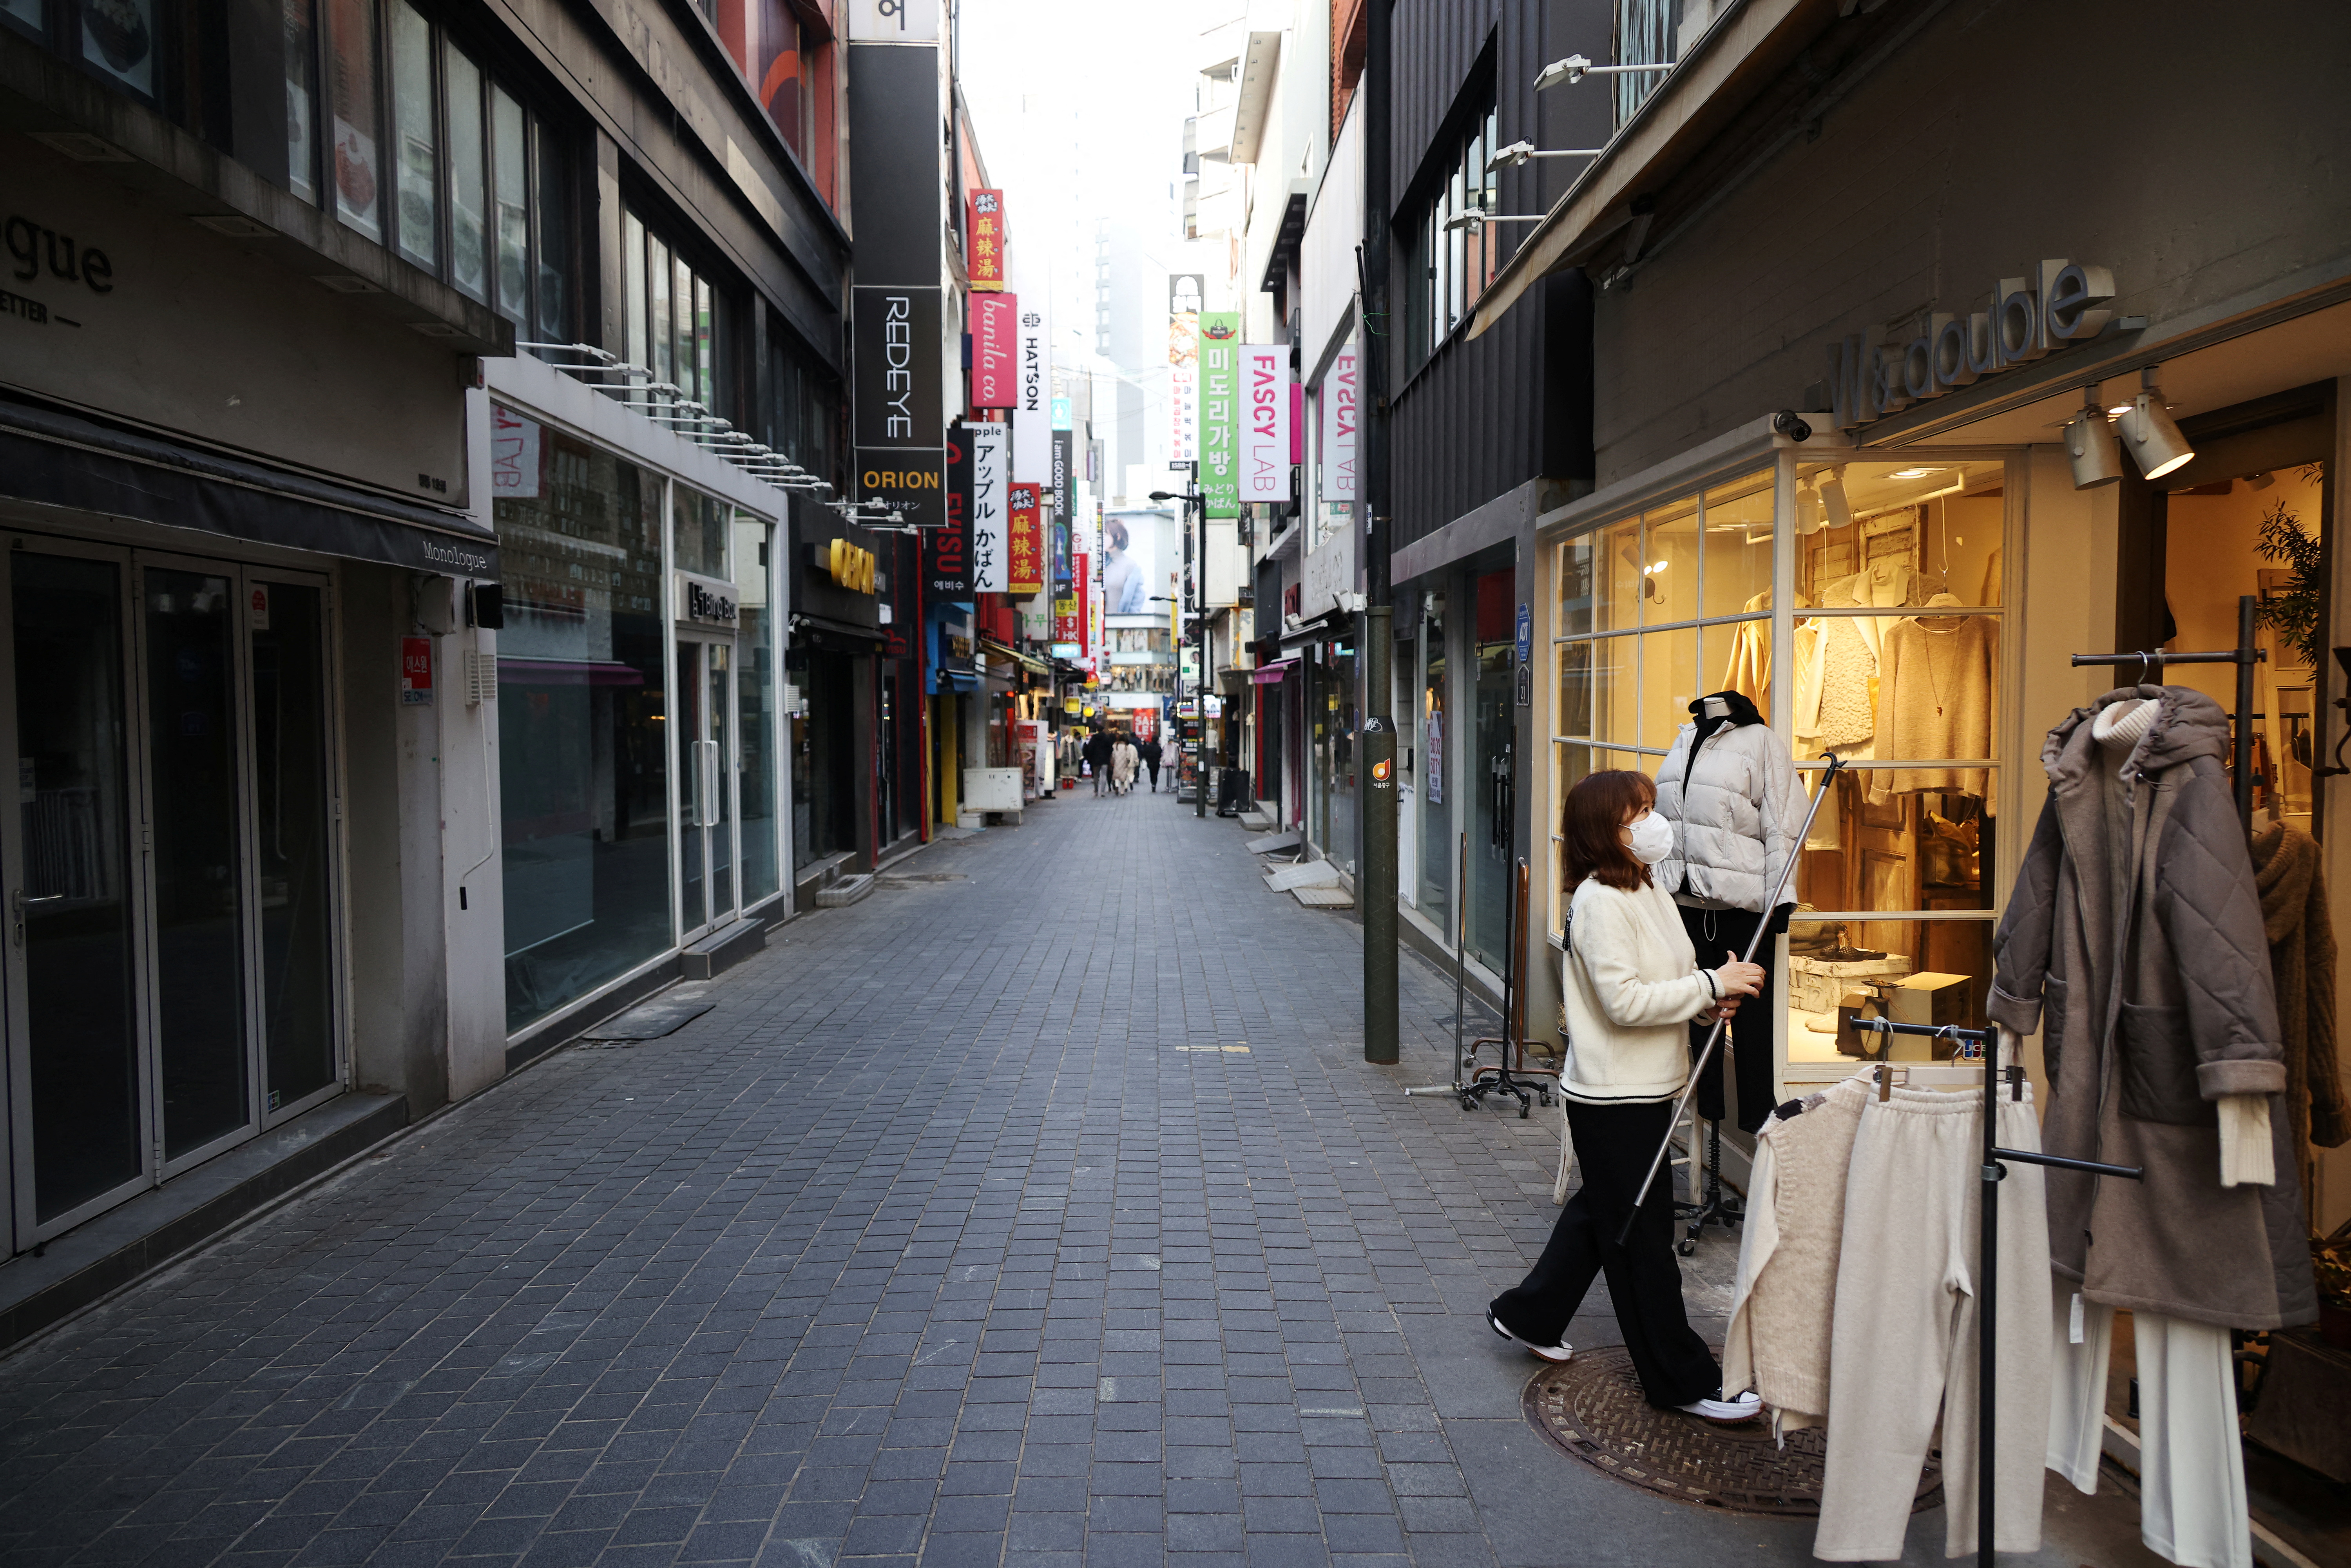 An employee puts up clothing on display amid the COVID-19 pandemic at an empty shopping district in Seoul